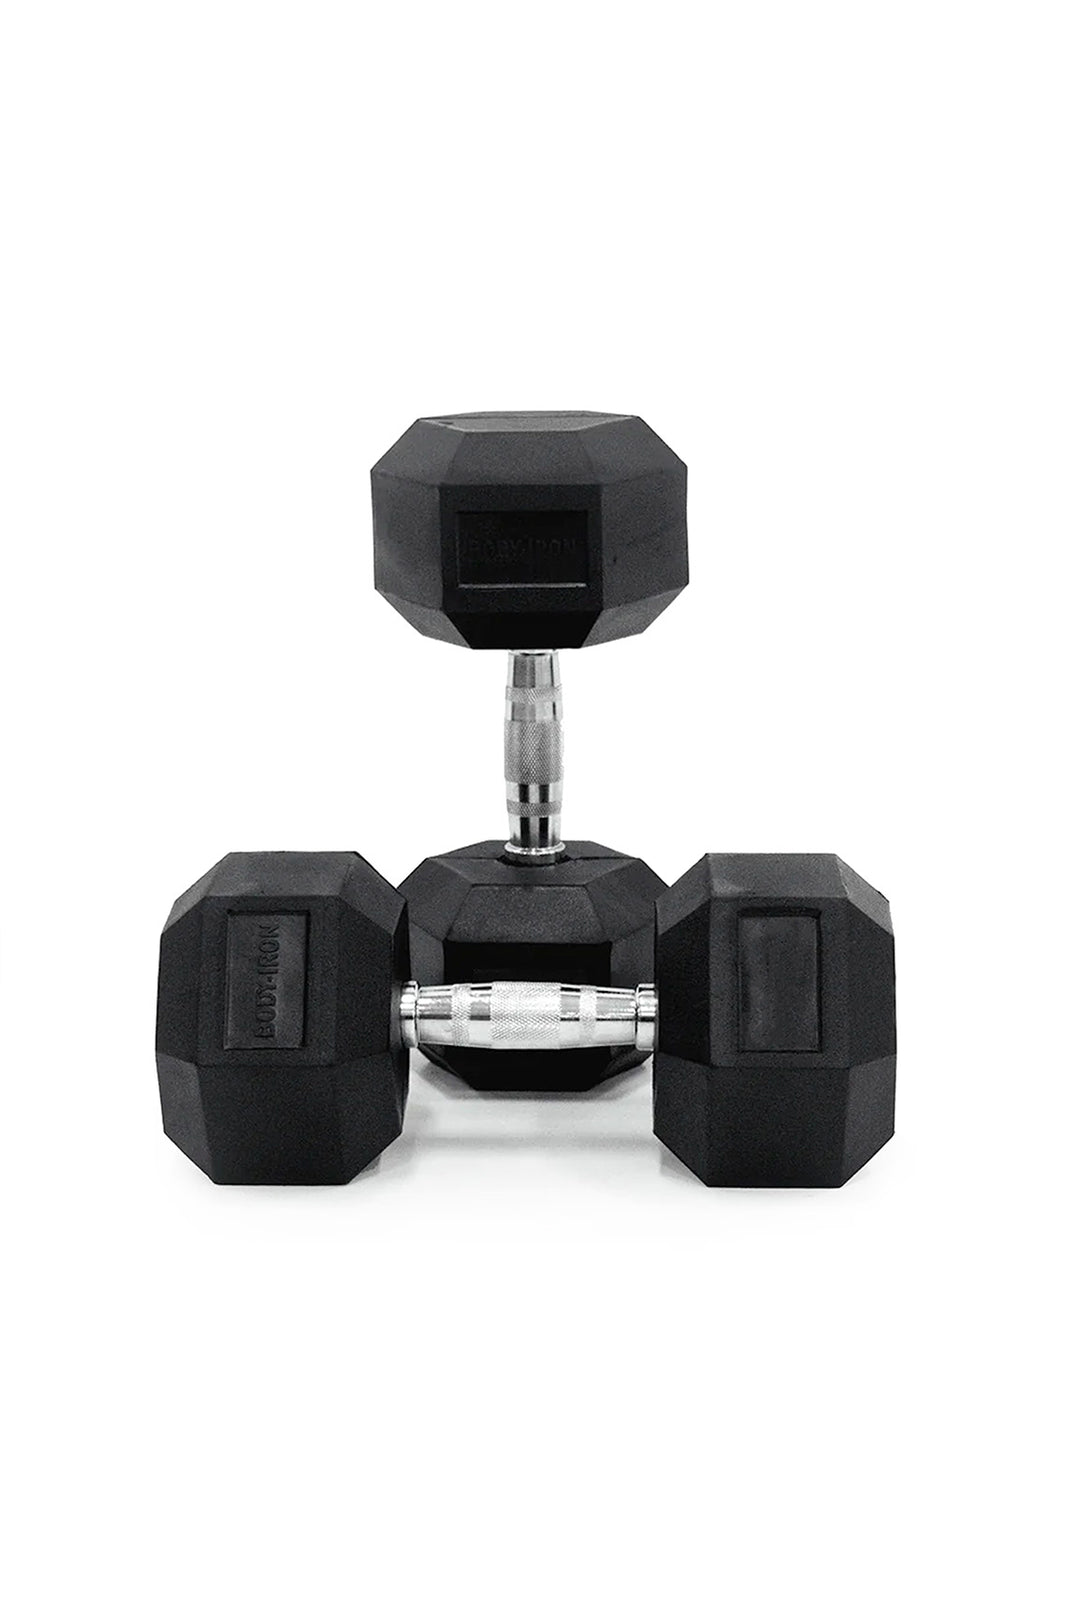 25kg Body Iron Commercial Rubber Hex Dumbbell Pair